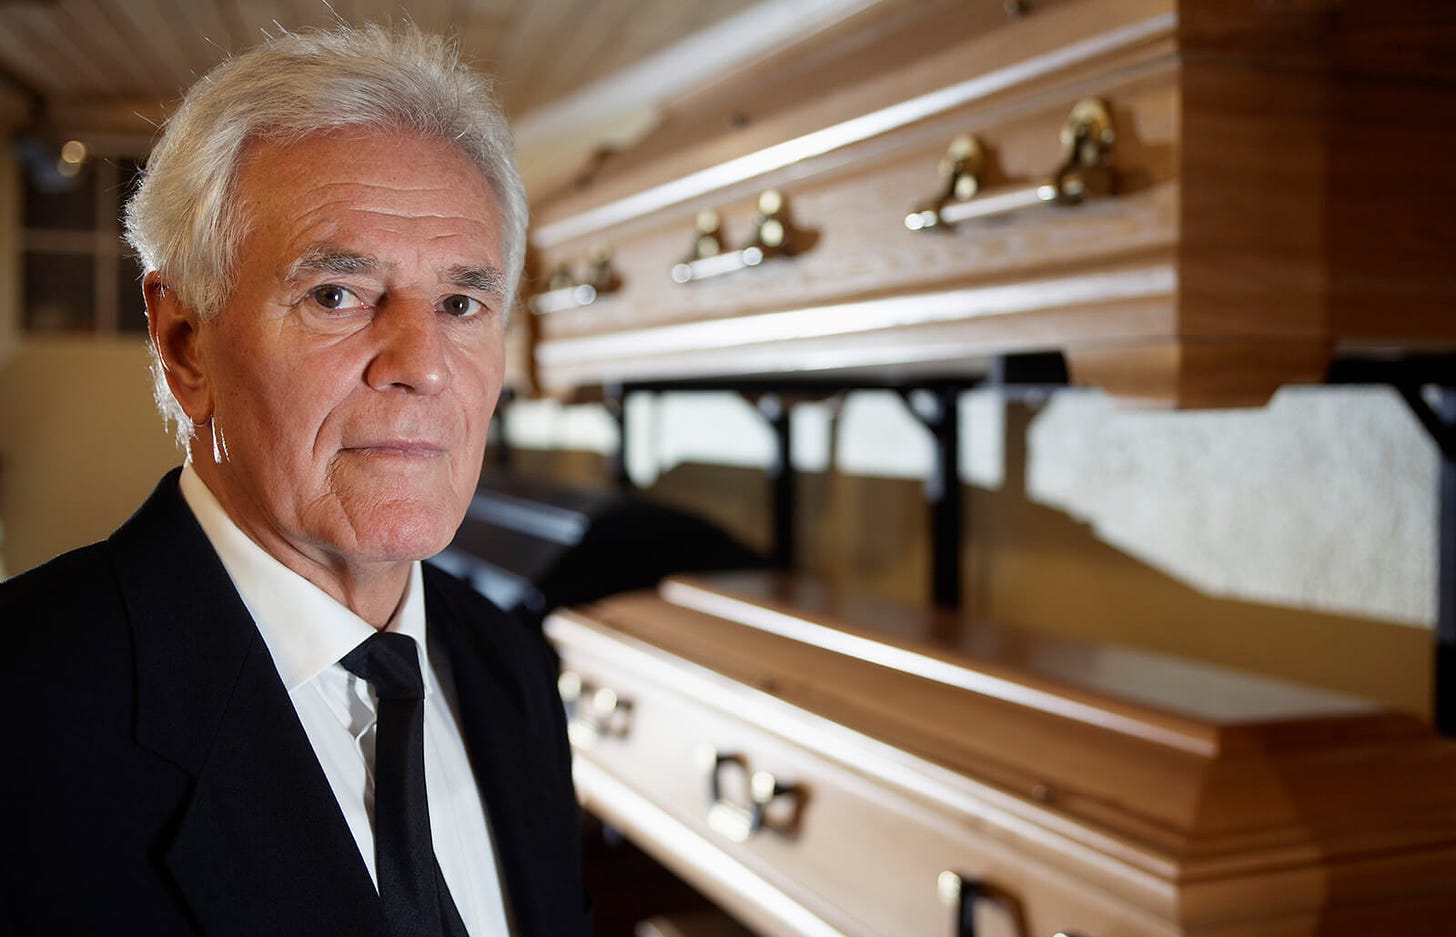 What Does a Funeral Director Do? Role and Duties | LoveToKnow